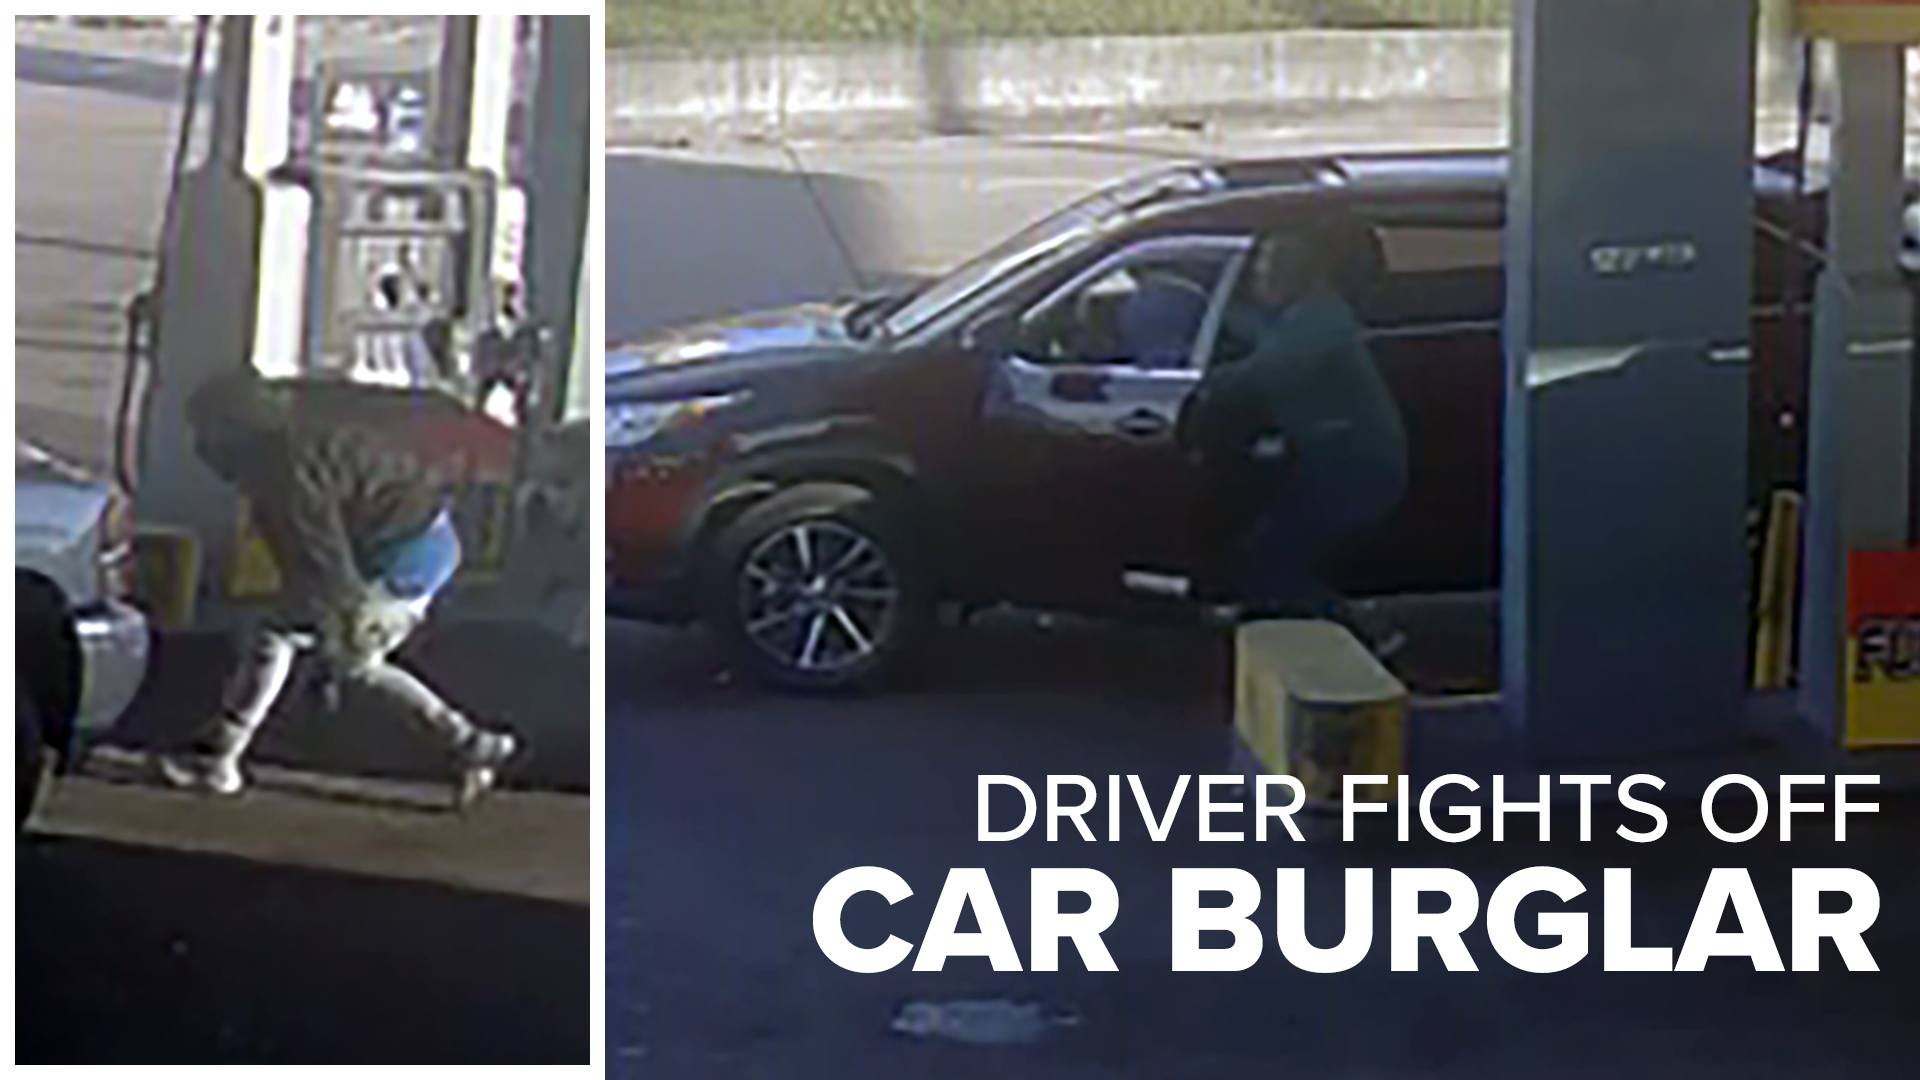 The NOPD said the suspects are also being investigated as possible perpetrators of a car burglary on Nov. 11 in the 1400 block of Gardena Drive.